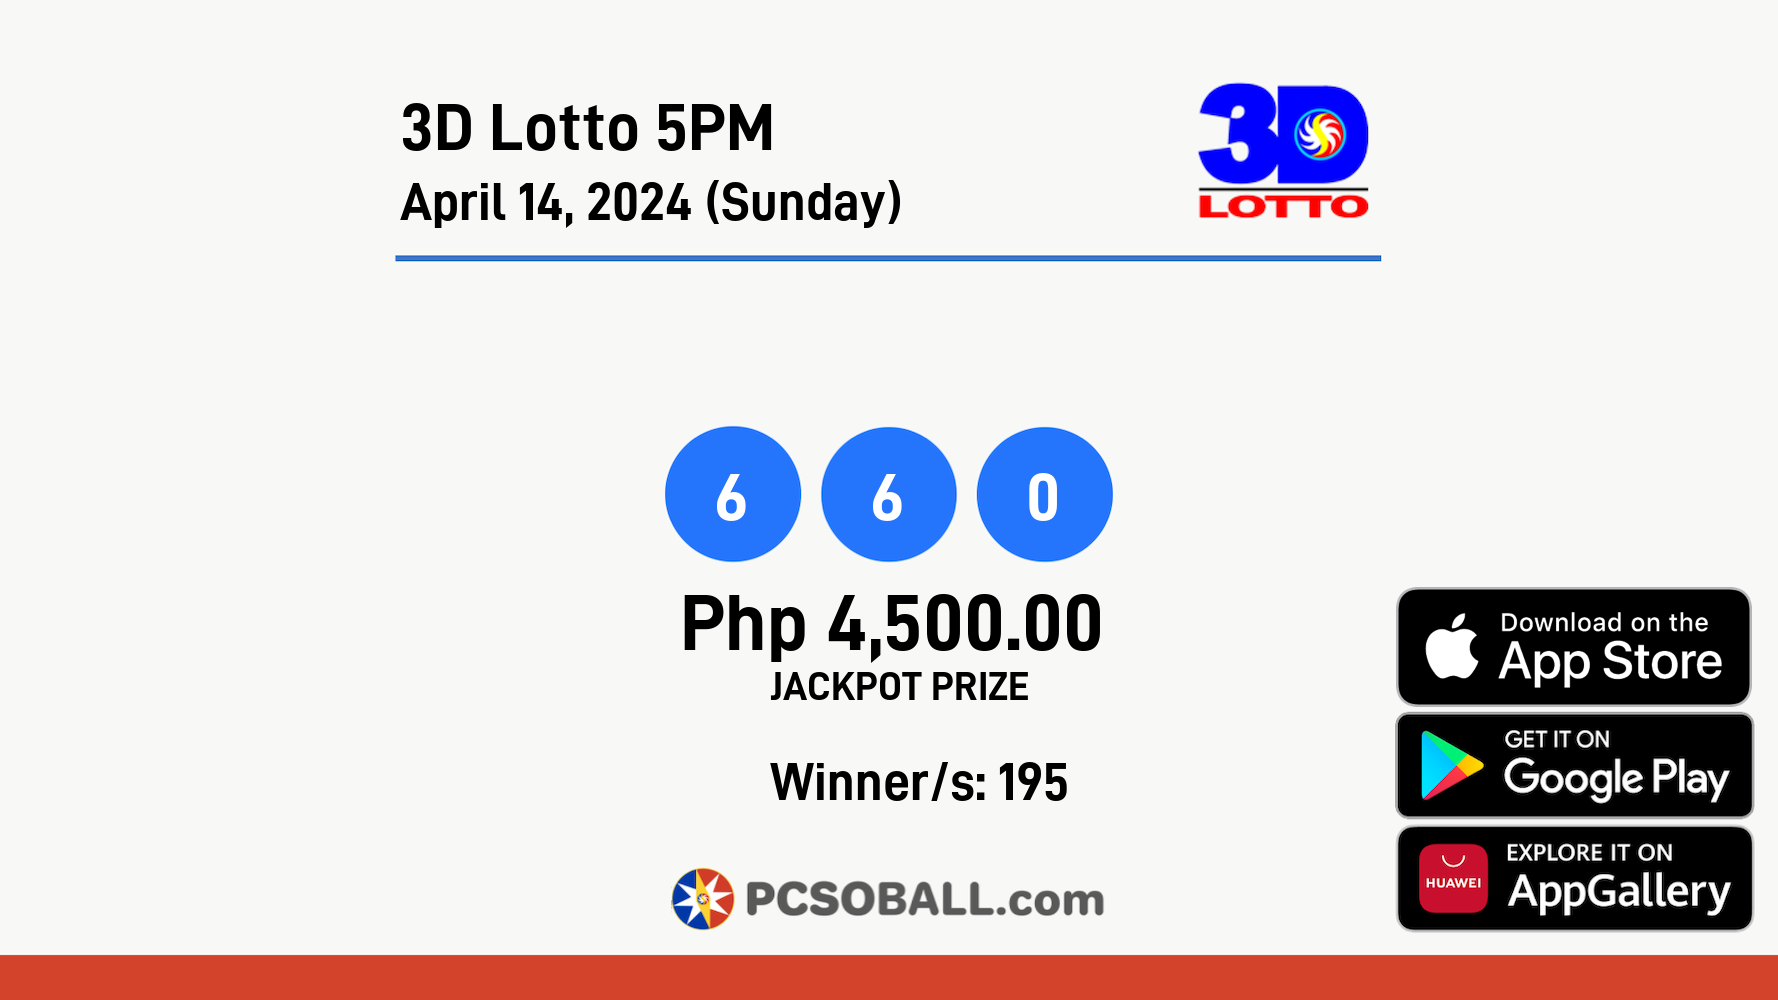 3D Lotto 5PM April 14, 2024 (Sunday) Result